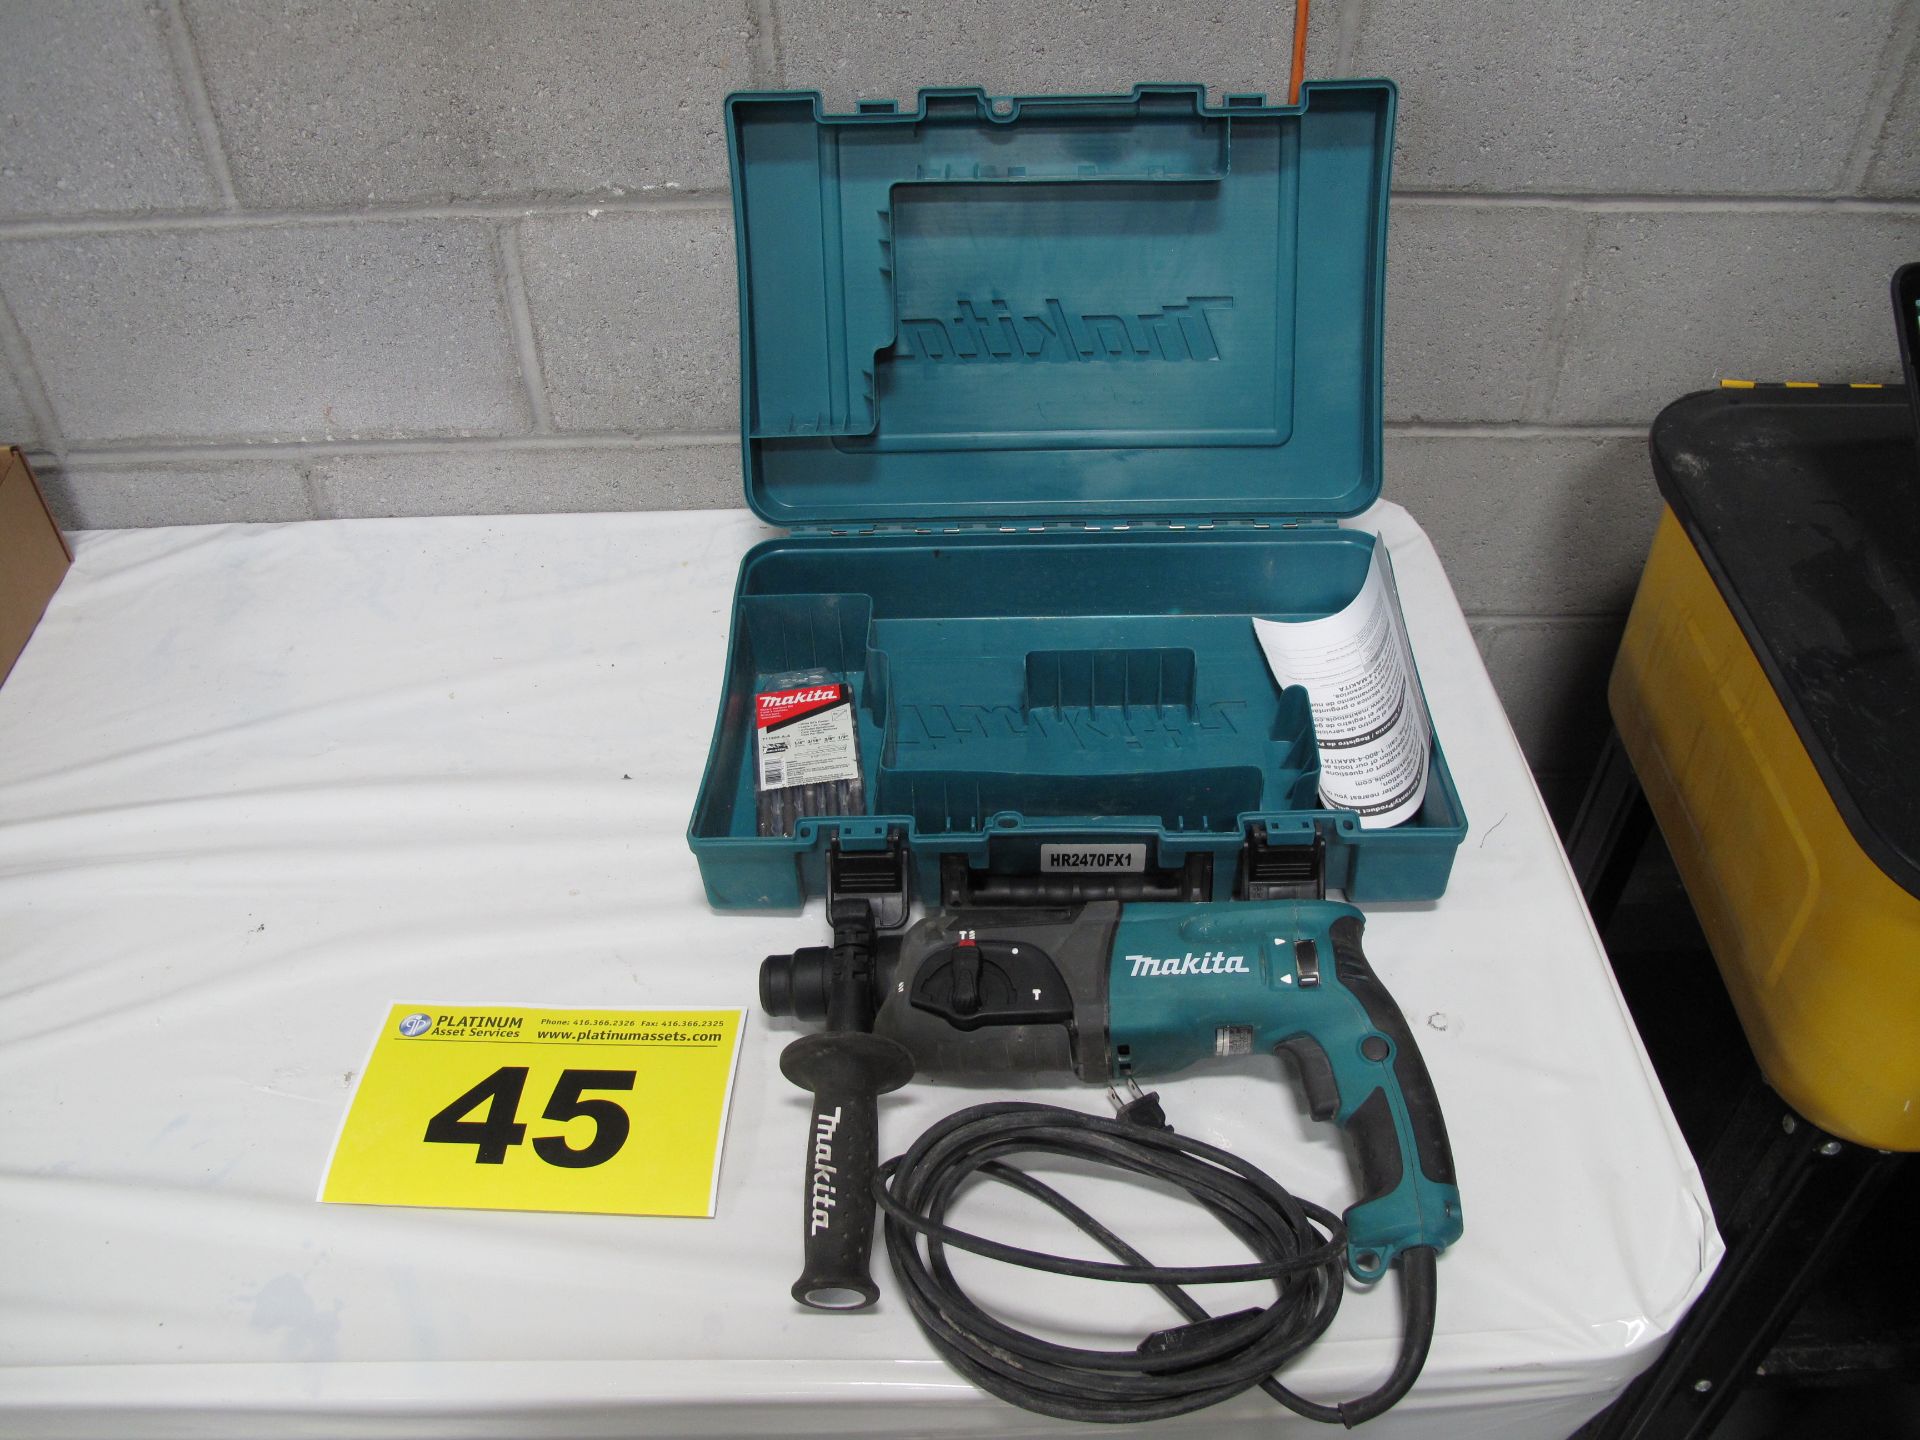 MAKITA, HR2470FX1, 24MM, ROTARY HAMMER DRILL WITH CASE, 4,500 RPM, 6.7 AMP, 110 VAC